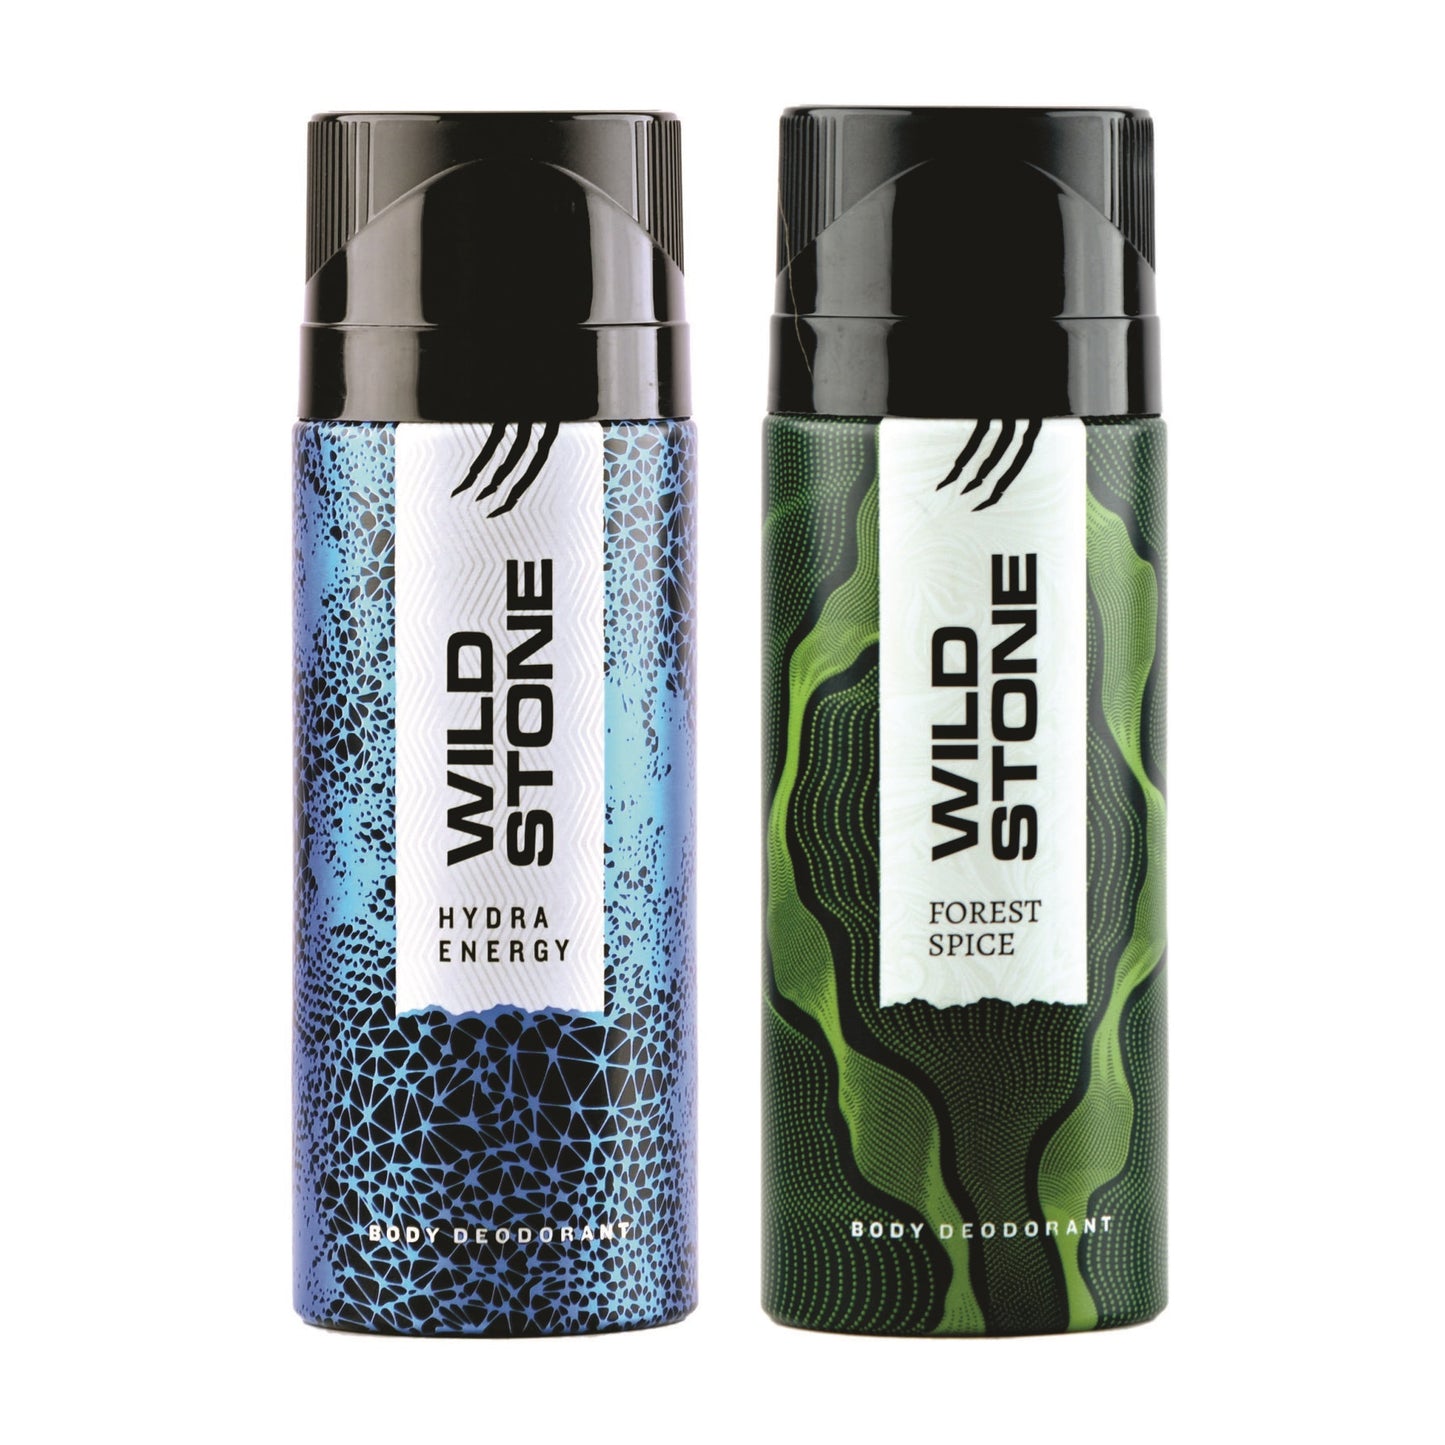 Wild Stone Forest Spice and Hydra Energy Deodorant Pack of 2 (150ml each)